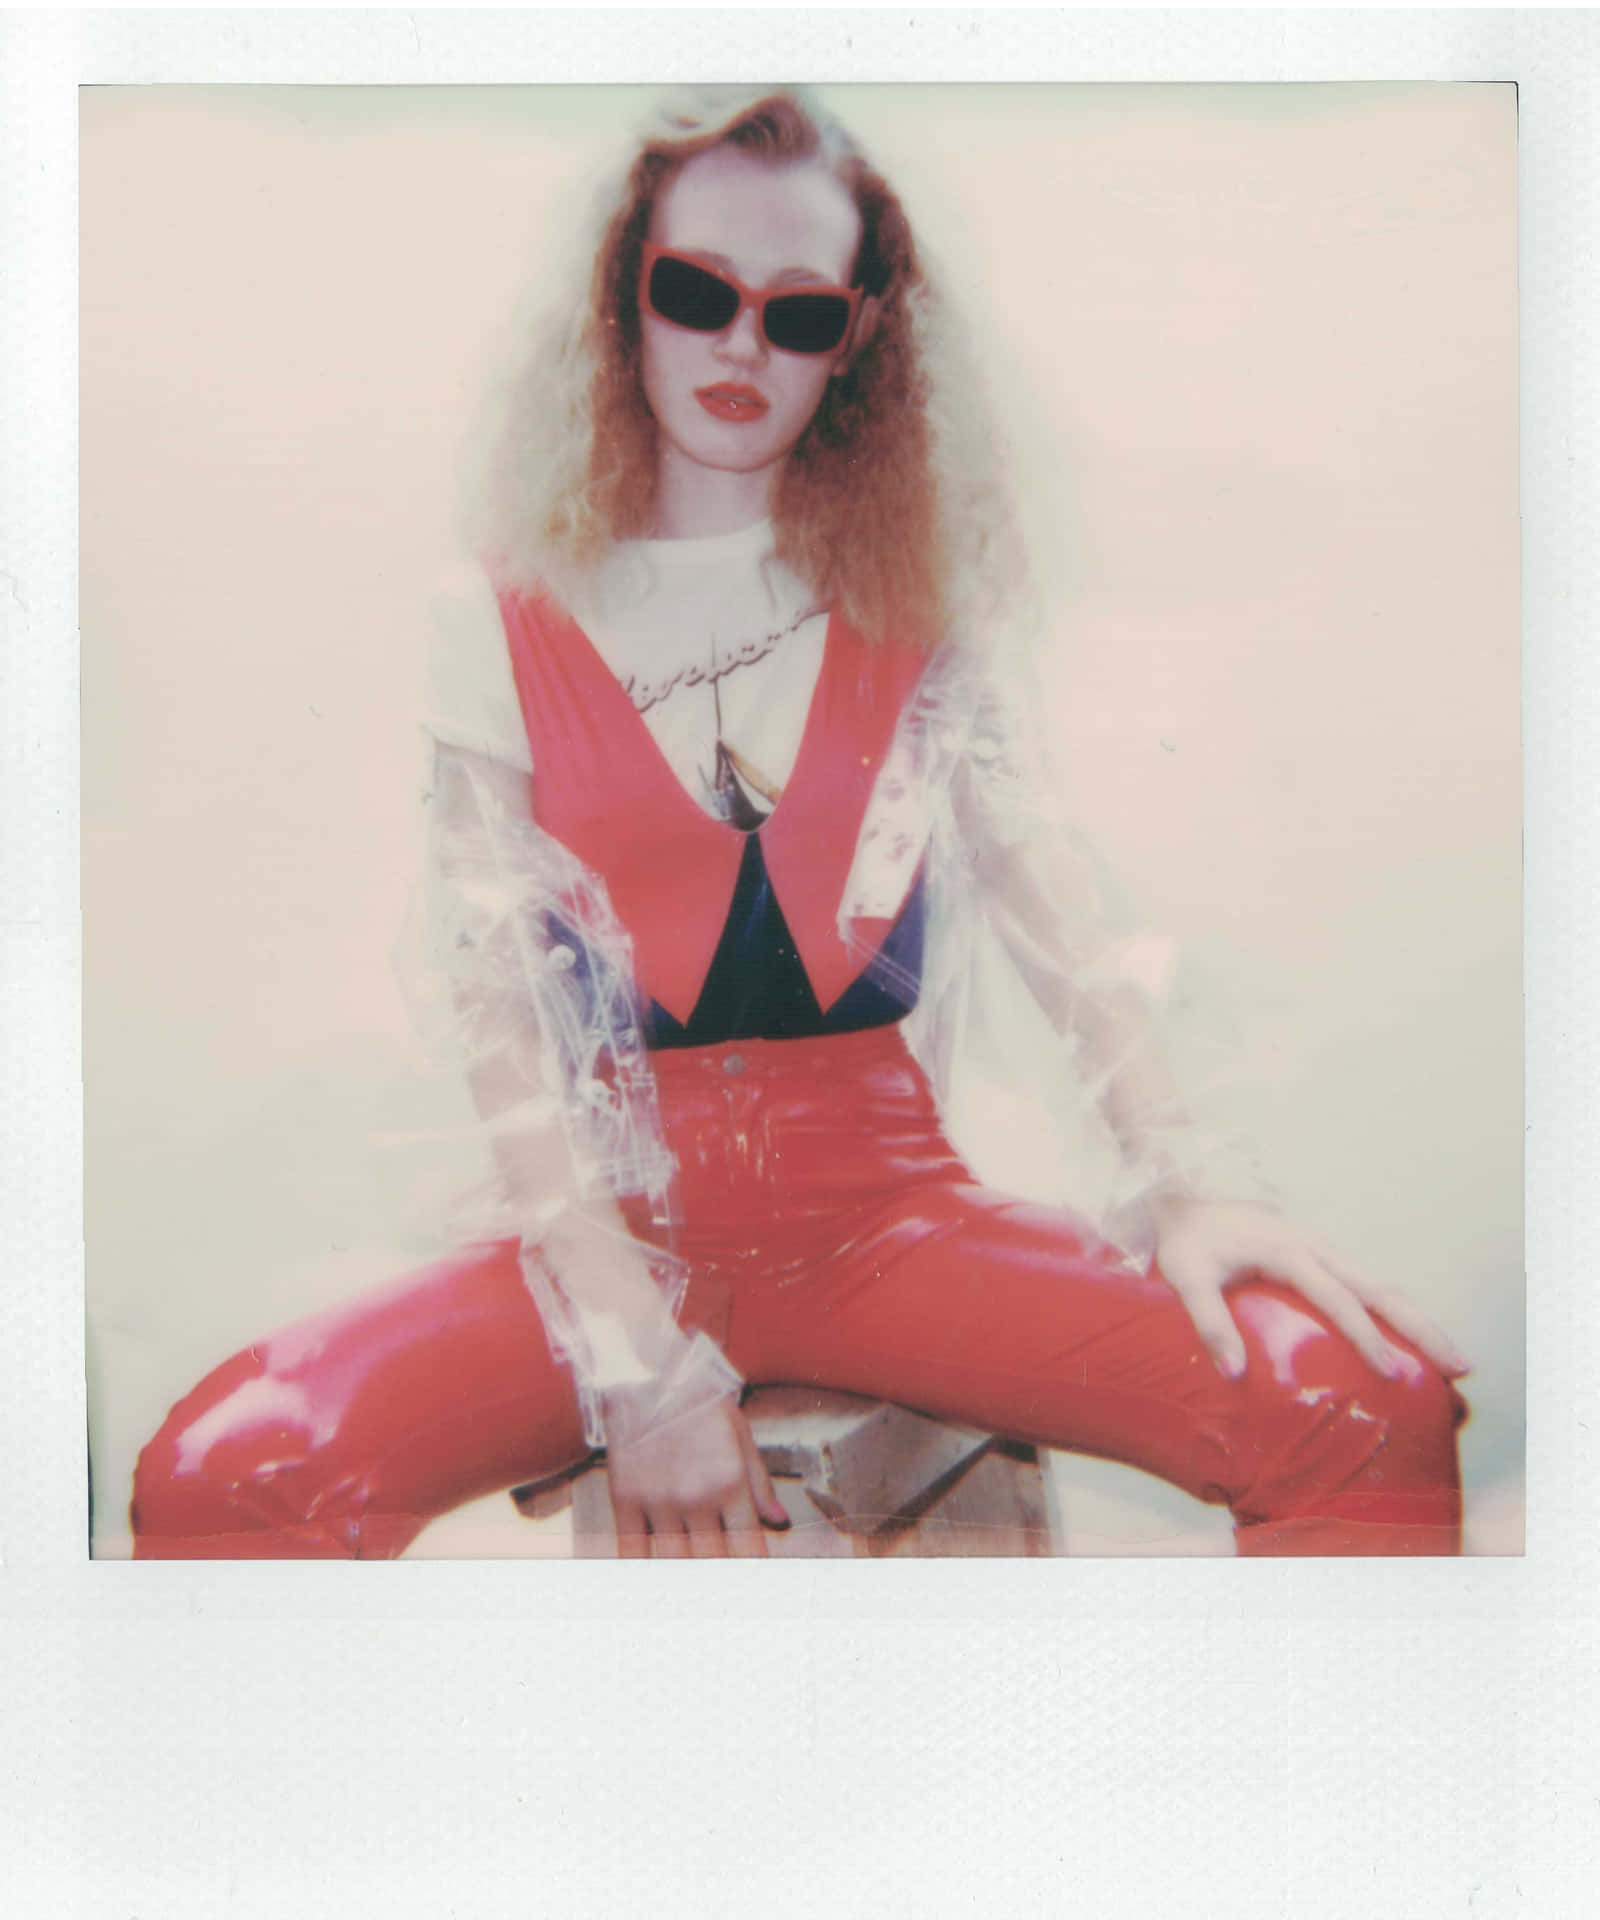 A Woman In Red Pants And Sunglasses Sitting On A Stool